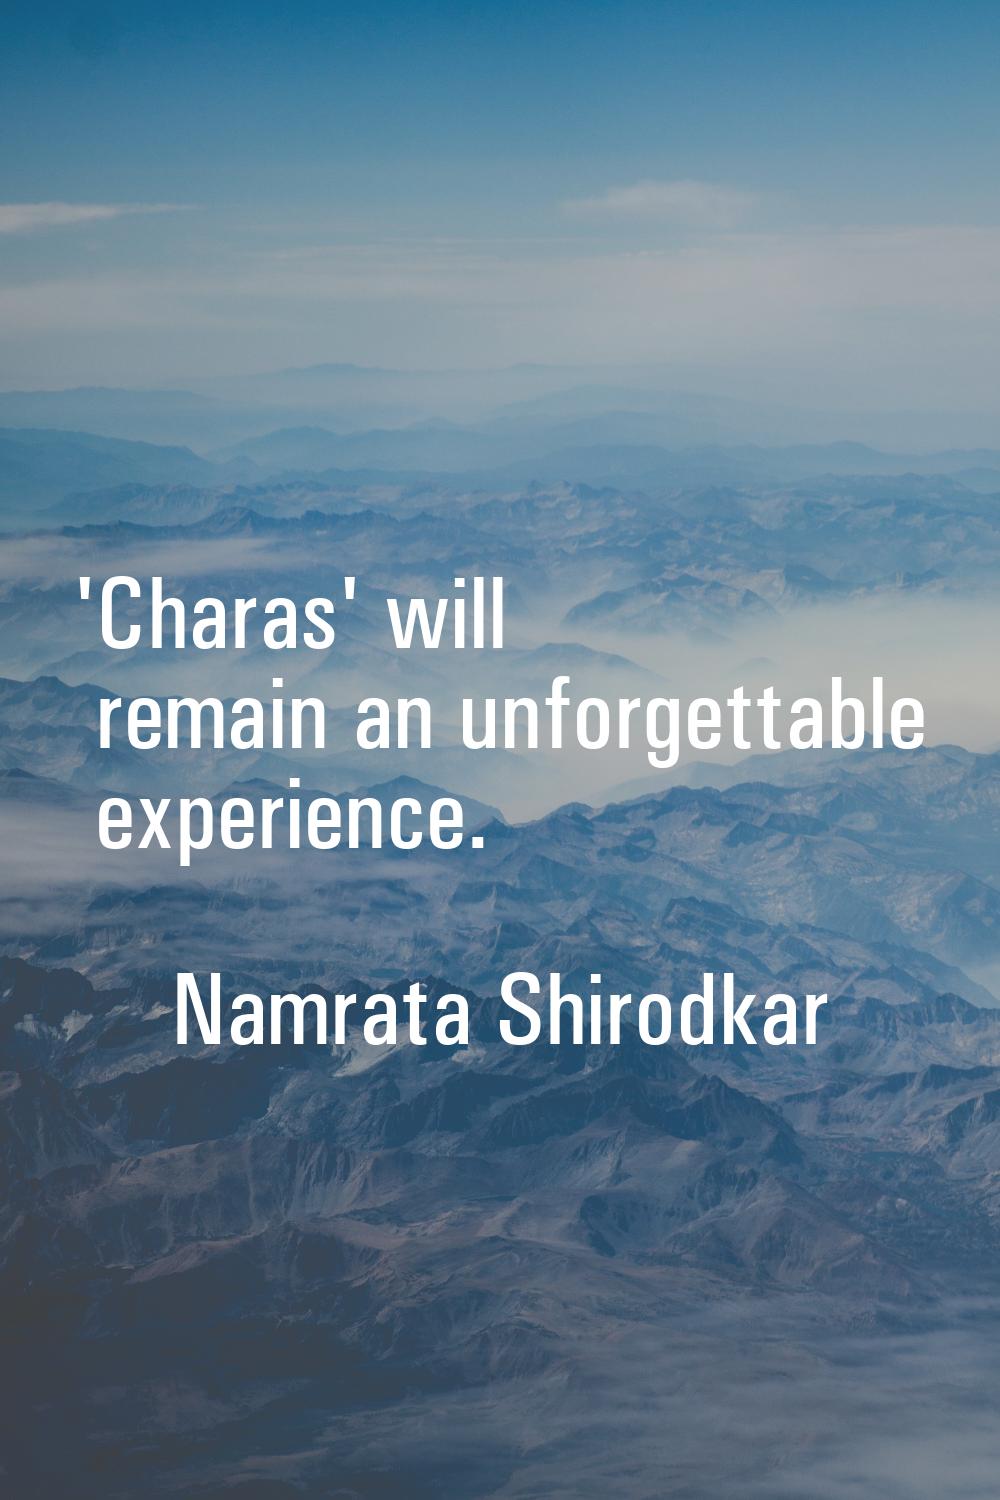 'Charas' will remain an unforgettable experience.